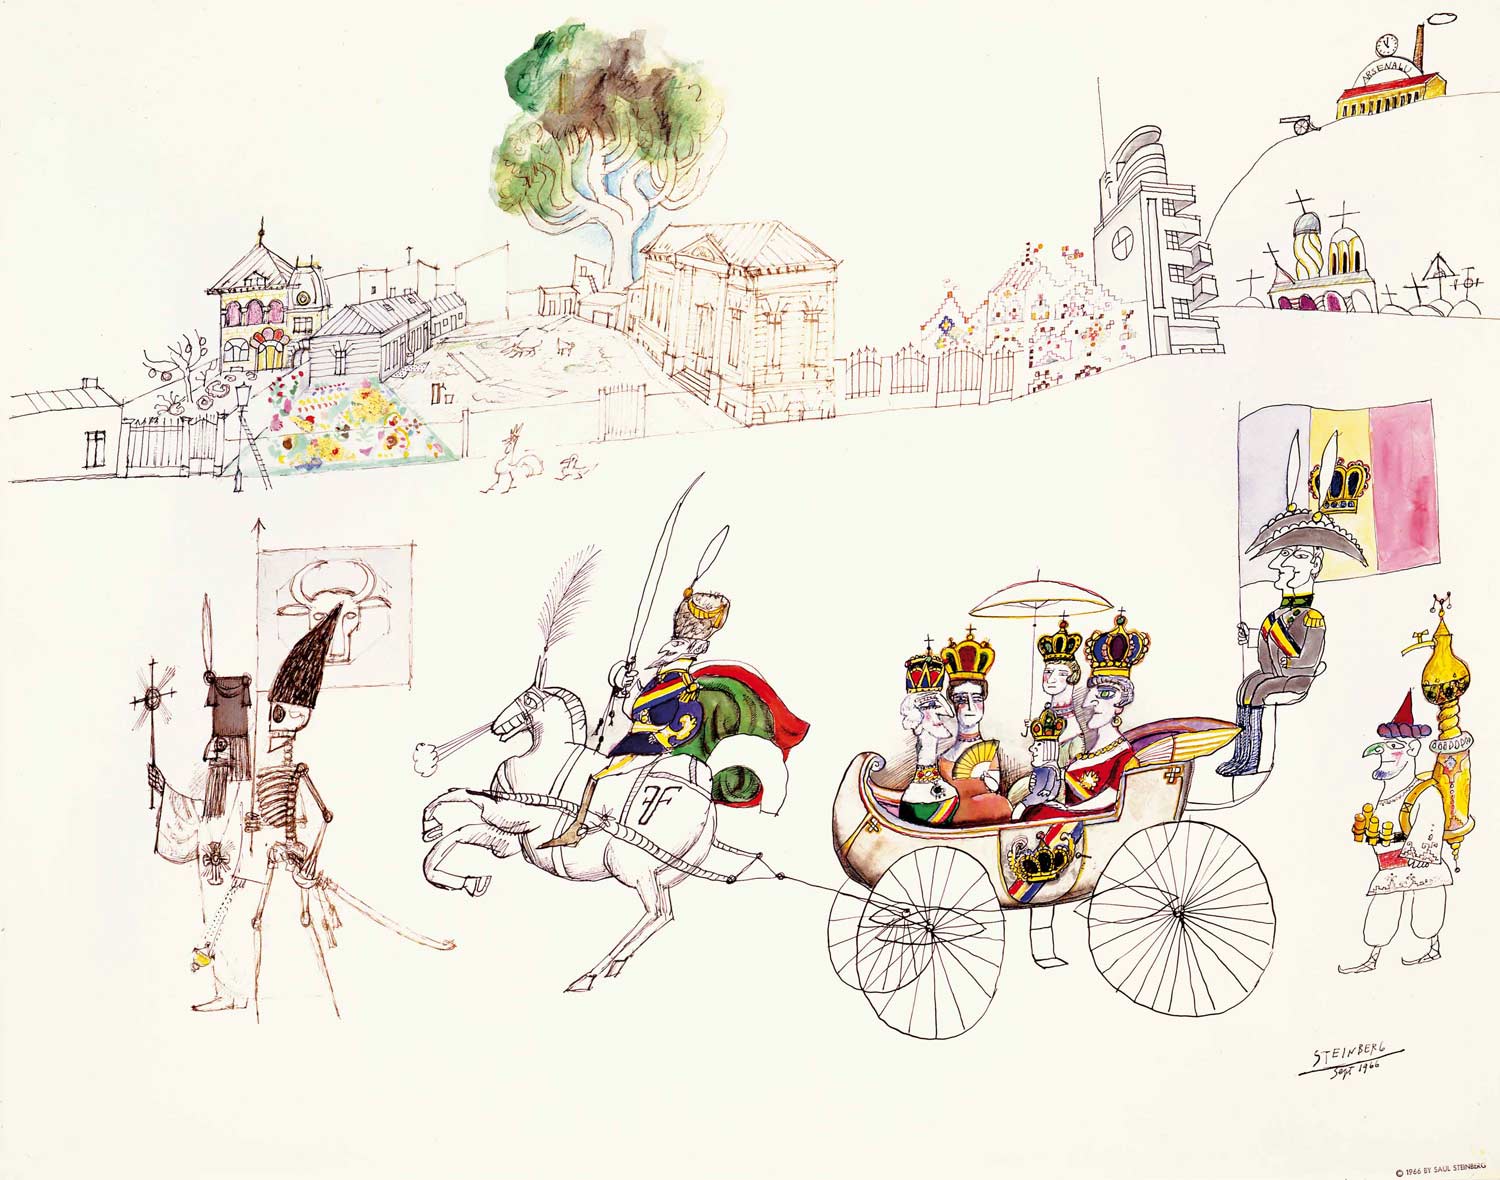 <em>Strada Palas</em>, 1966. Graphite, pen, colored inks, watercolor, gouache, colored chalks, and gold enamel on paper, 23 x 29 in. Israel Museum, Jerusalem; Gift of the artist, through the America-Israel Cultural Foundation